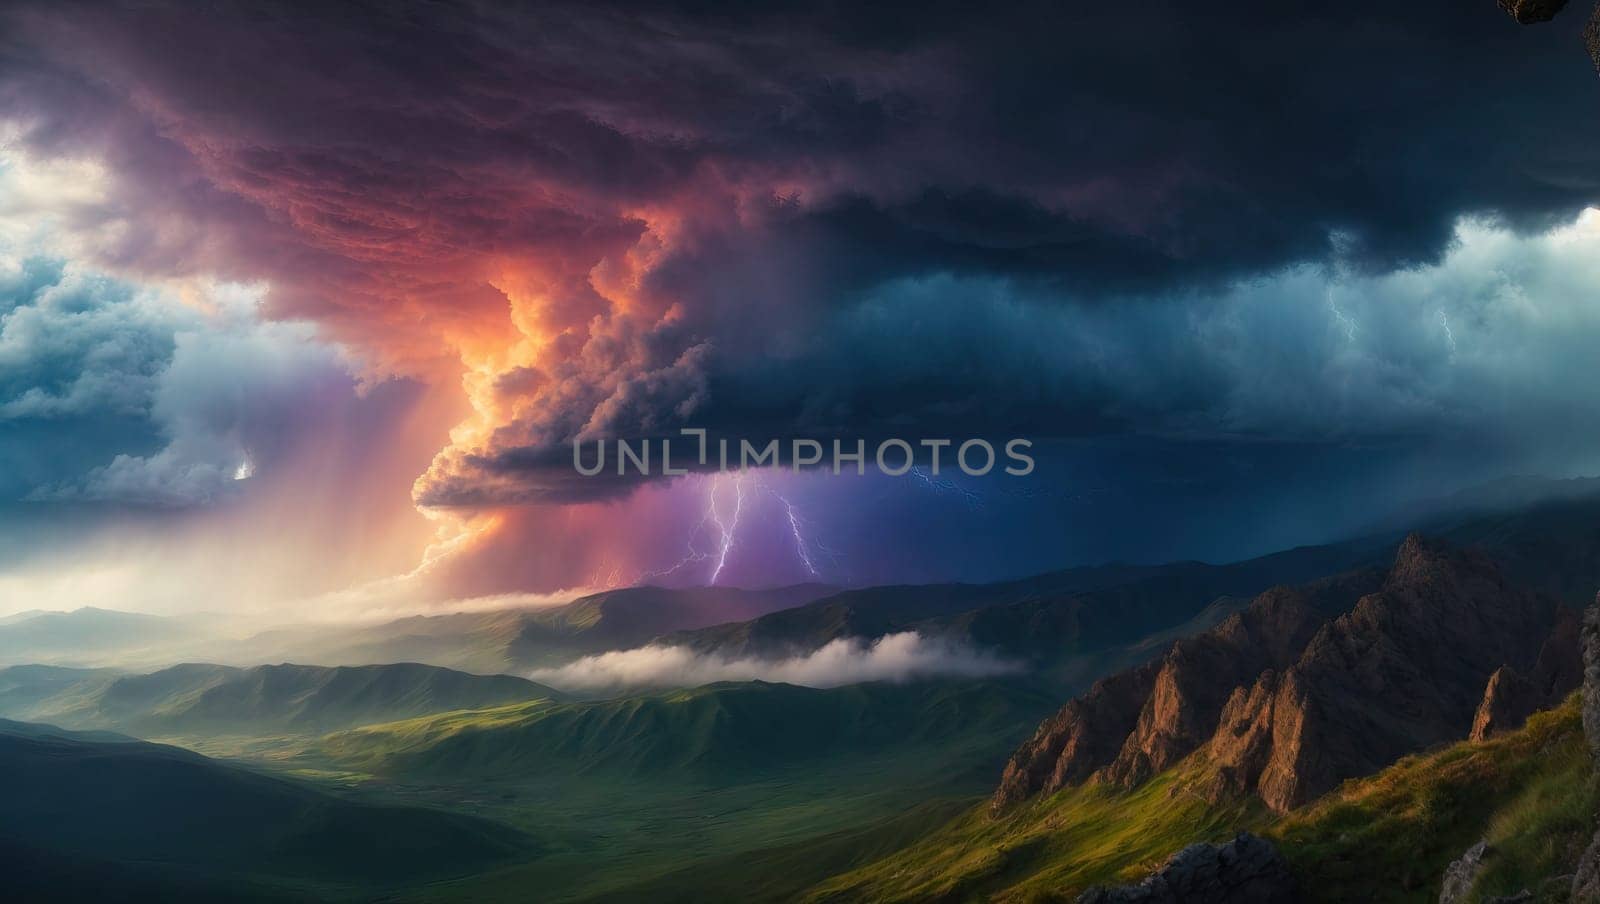 Epic dramatic storm cell as seen from high on a mountain by applesstock